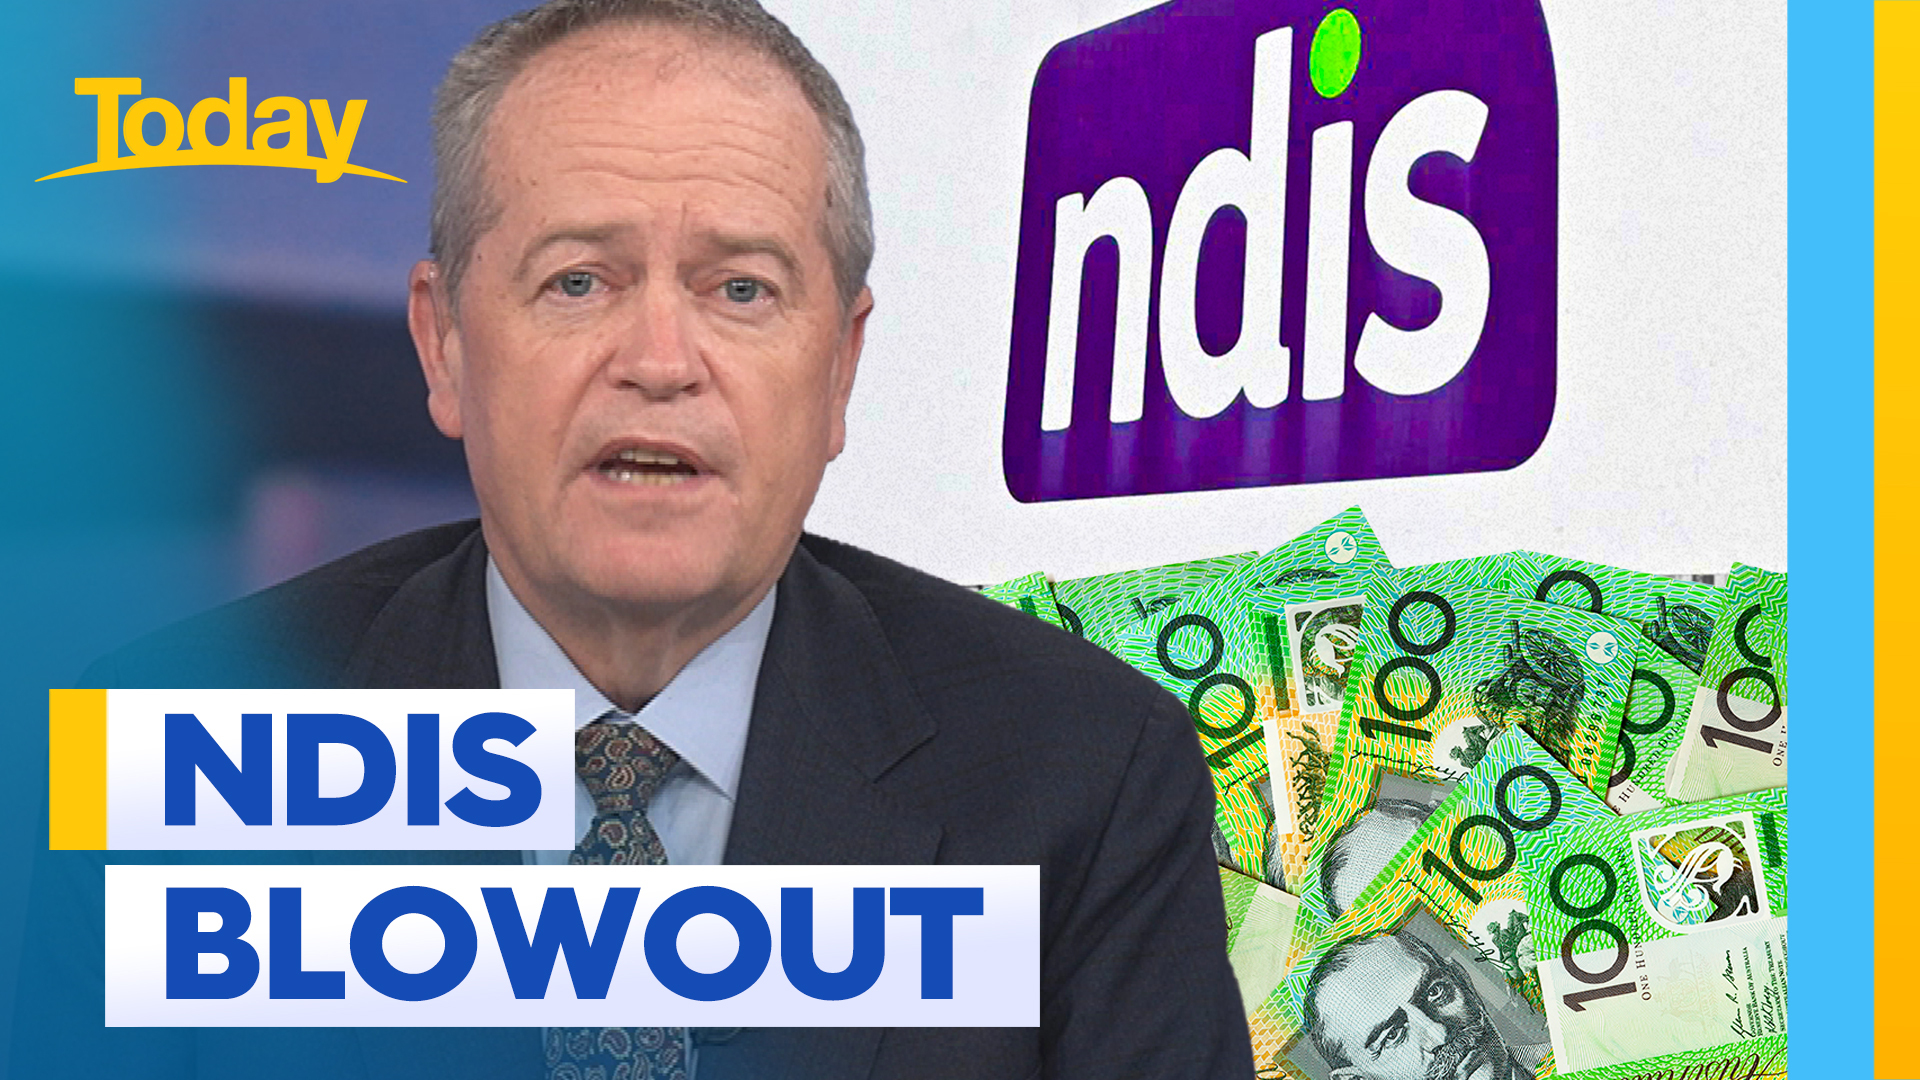 NDIS on track to become most expensive area of government spending